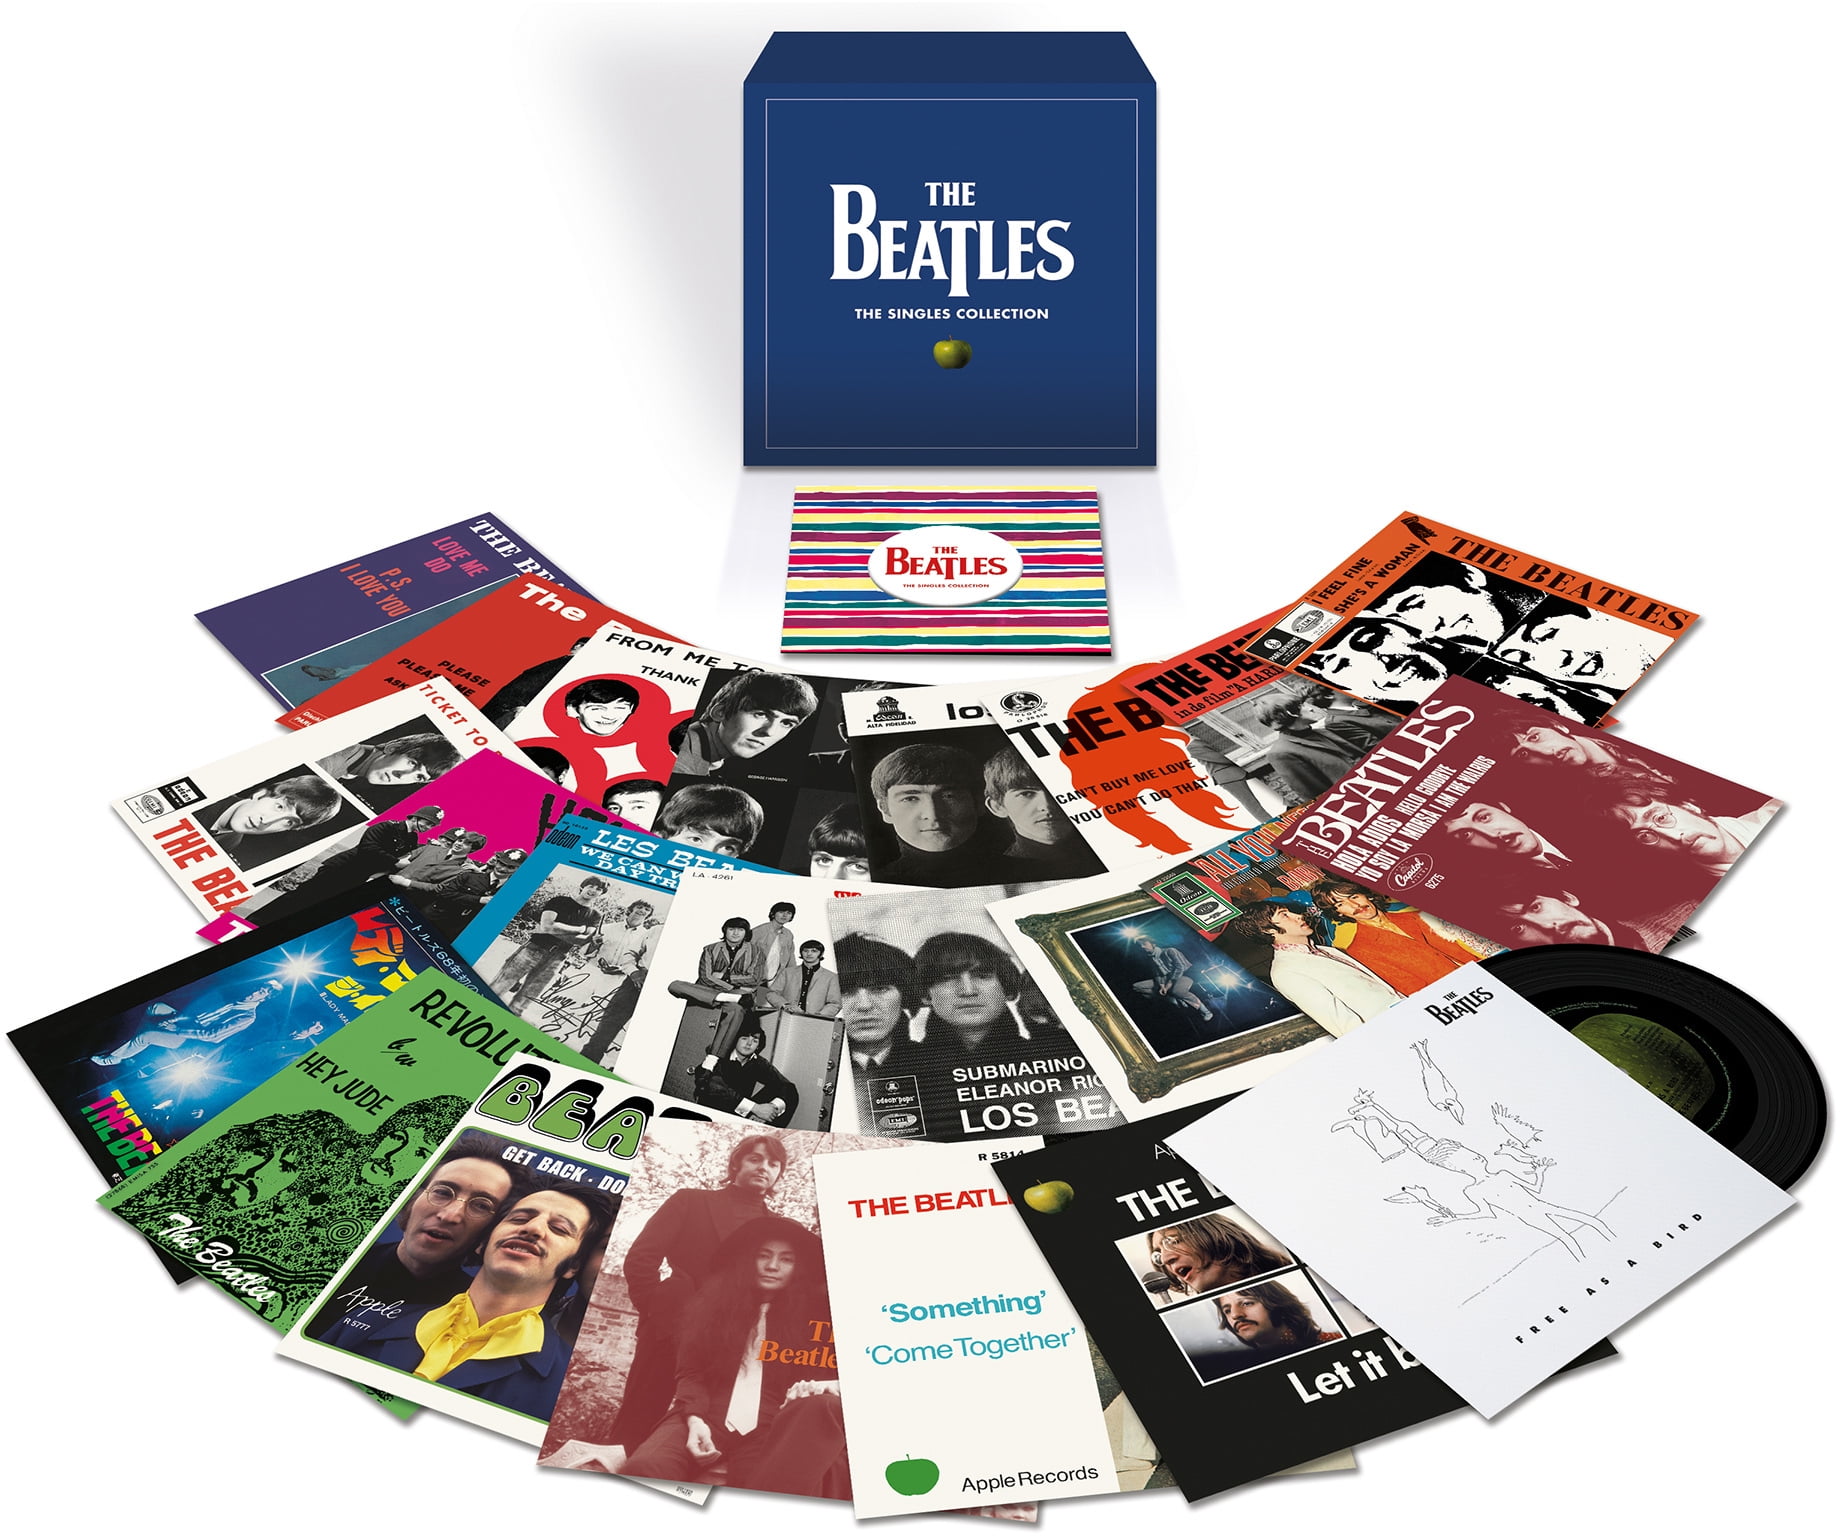 The Beatles - The Singles Collection - Vinyl (7-Inch) (Remaster) (Limited Edition) - Walmart.com